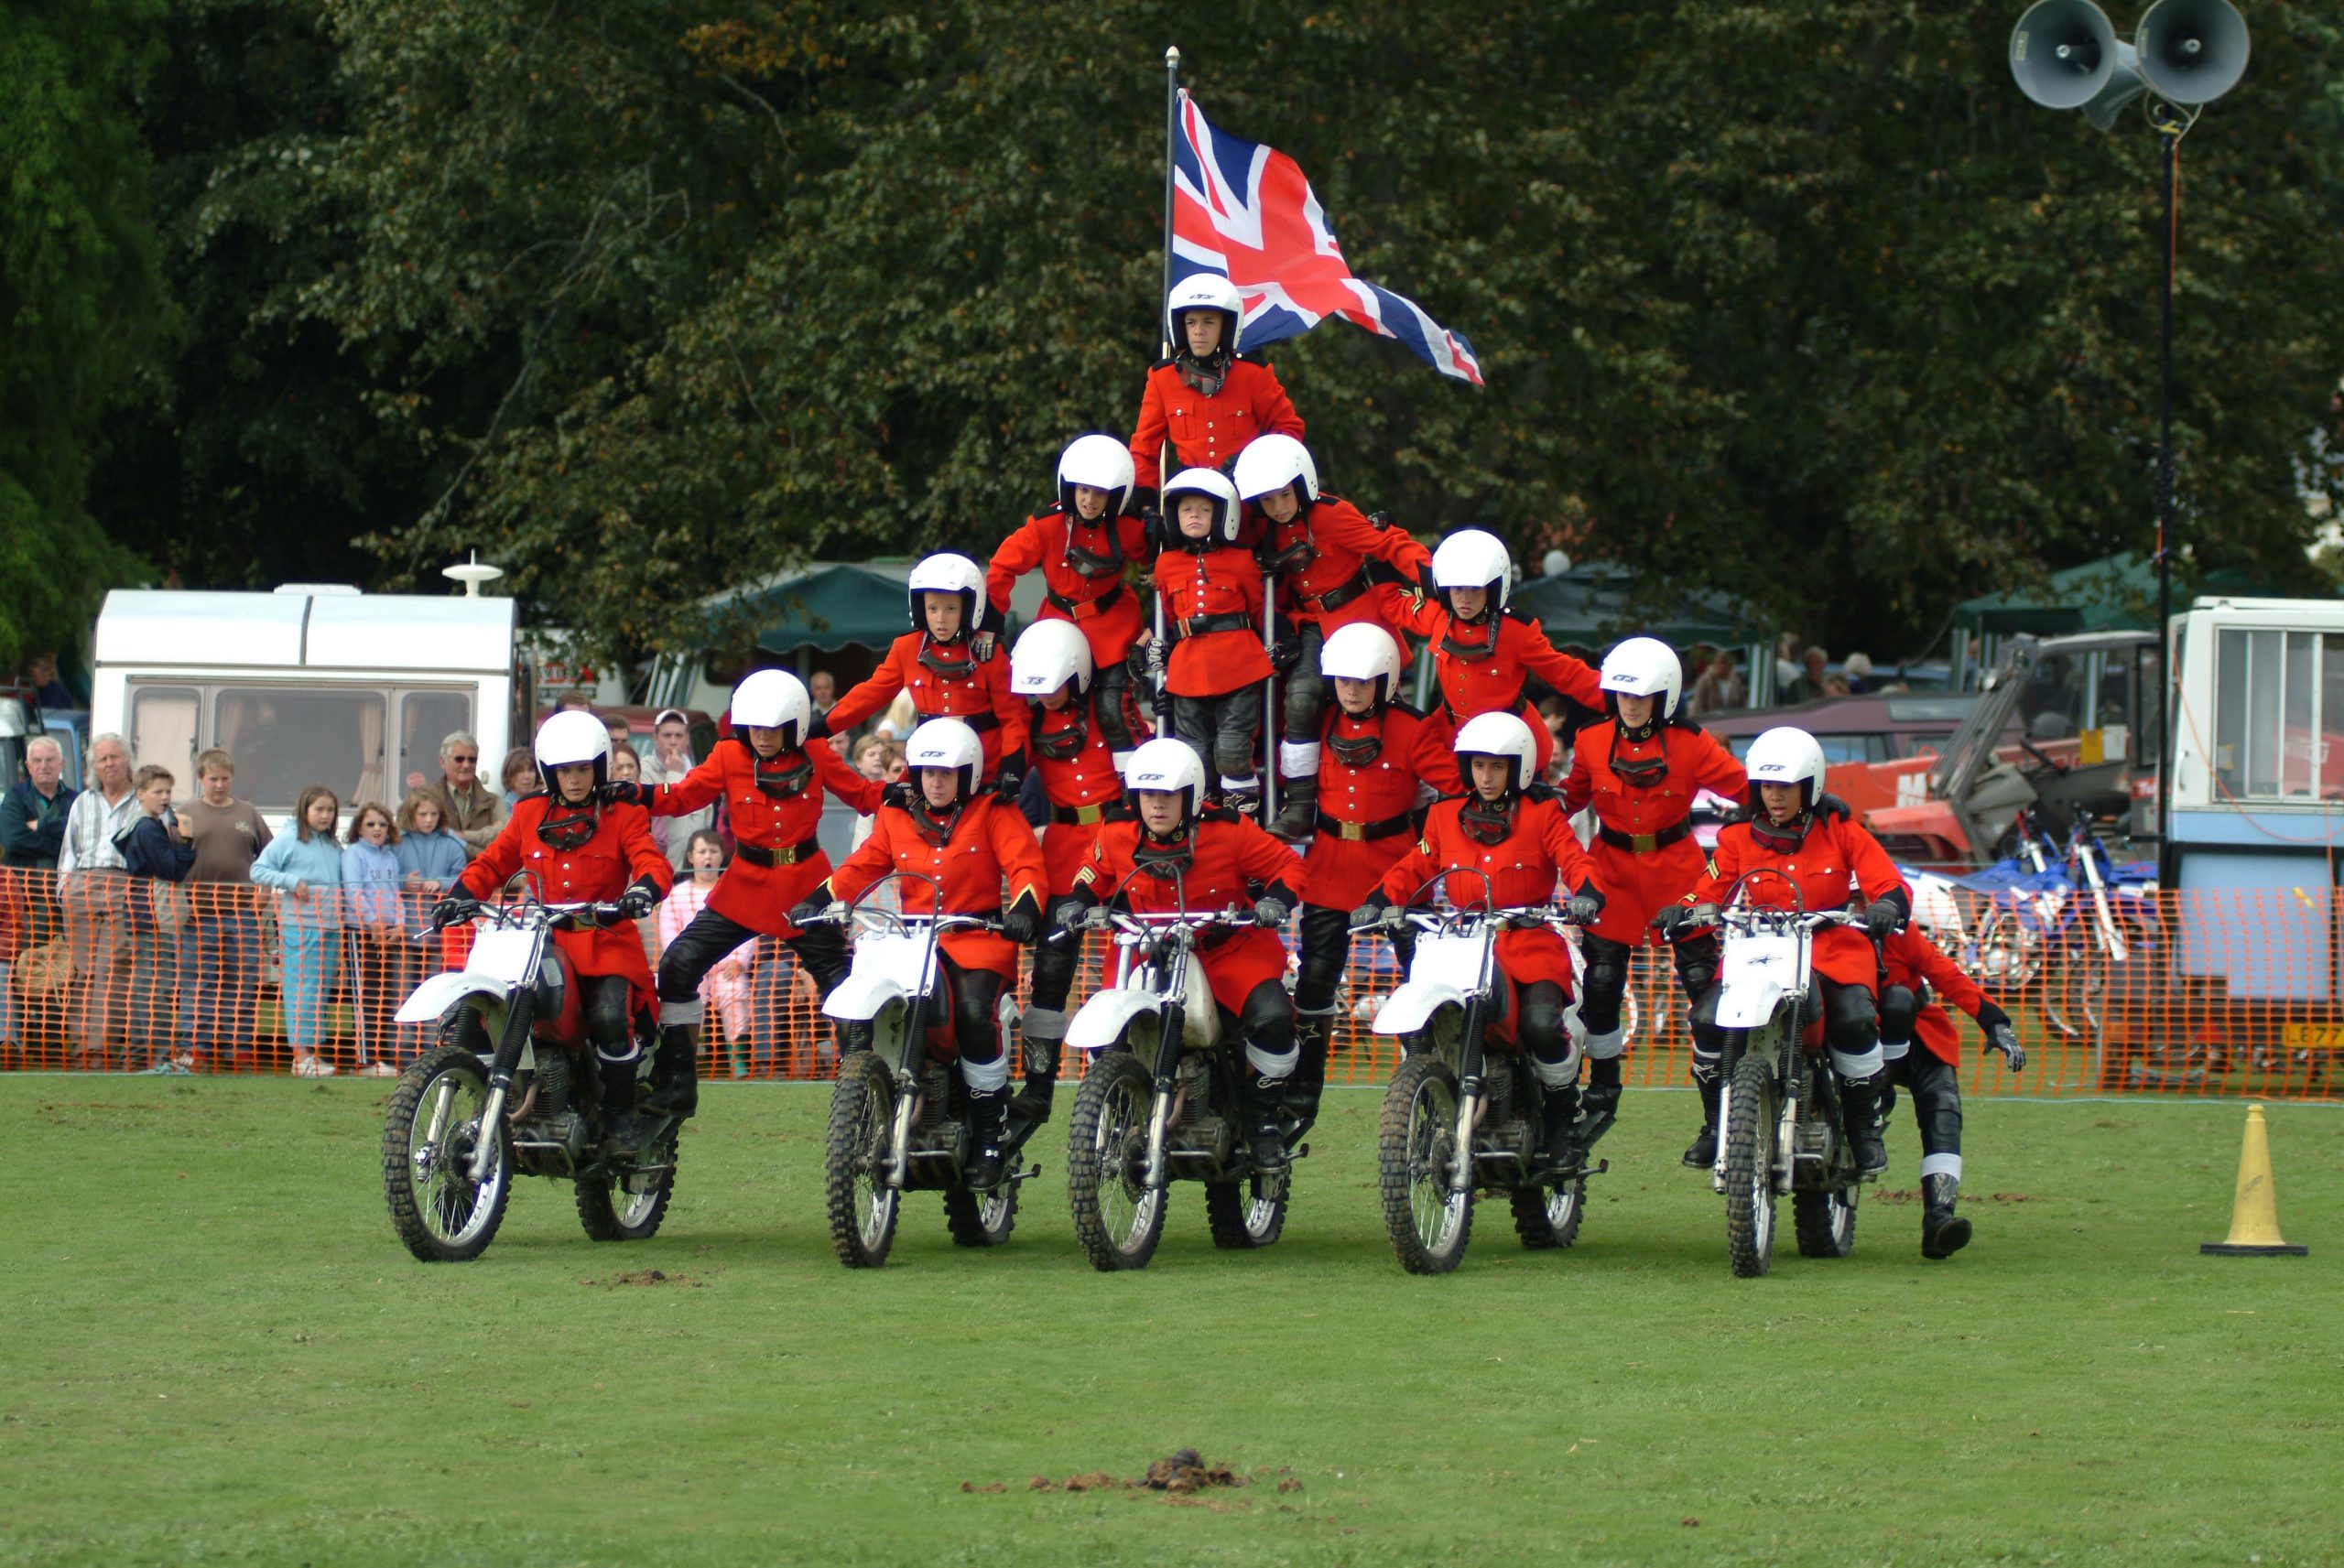 The charity teaching children discipline through motorcycle displays